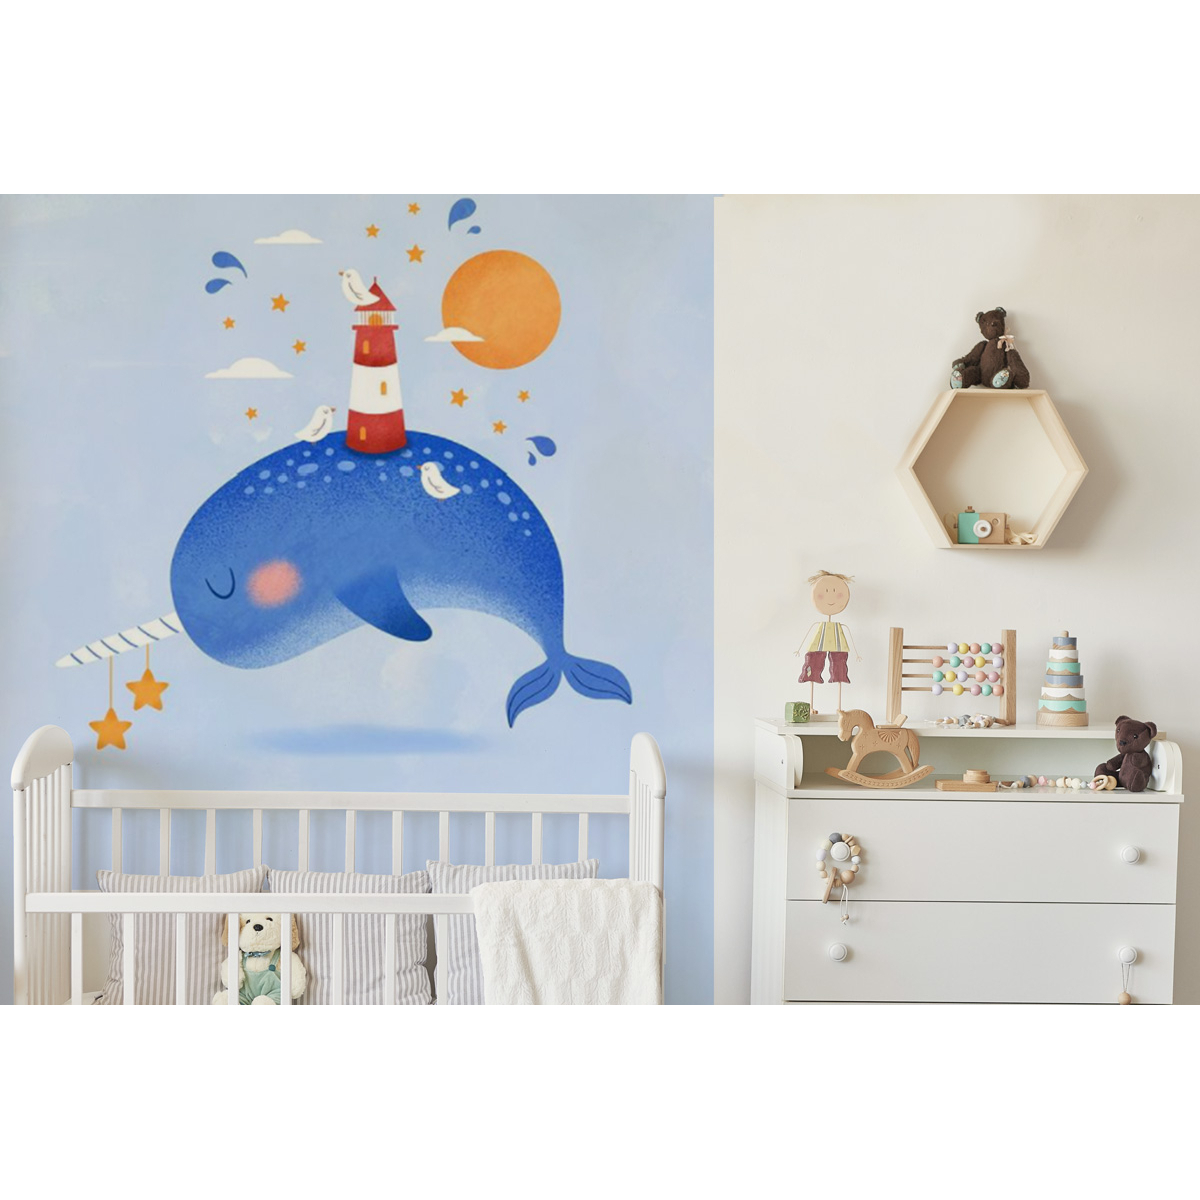 Narwhal panoramic wallpaper - Marion Blanc collection - Acte-Deco